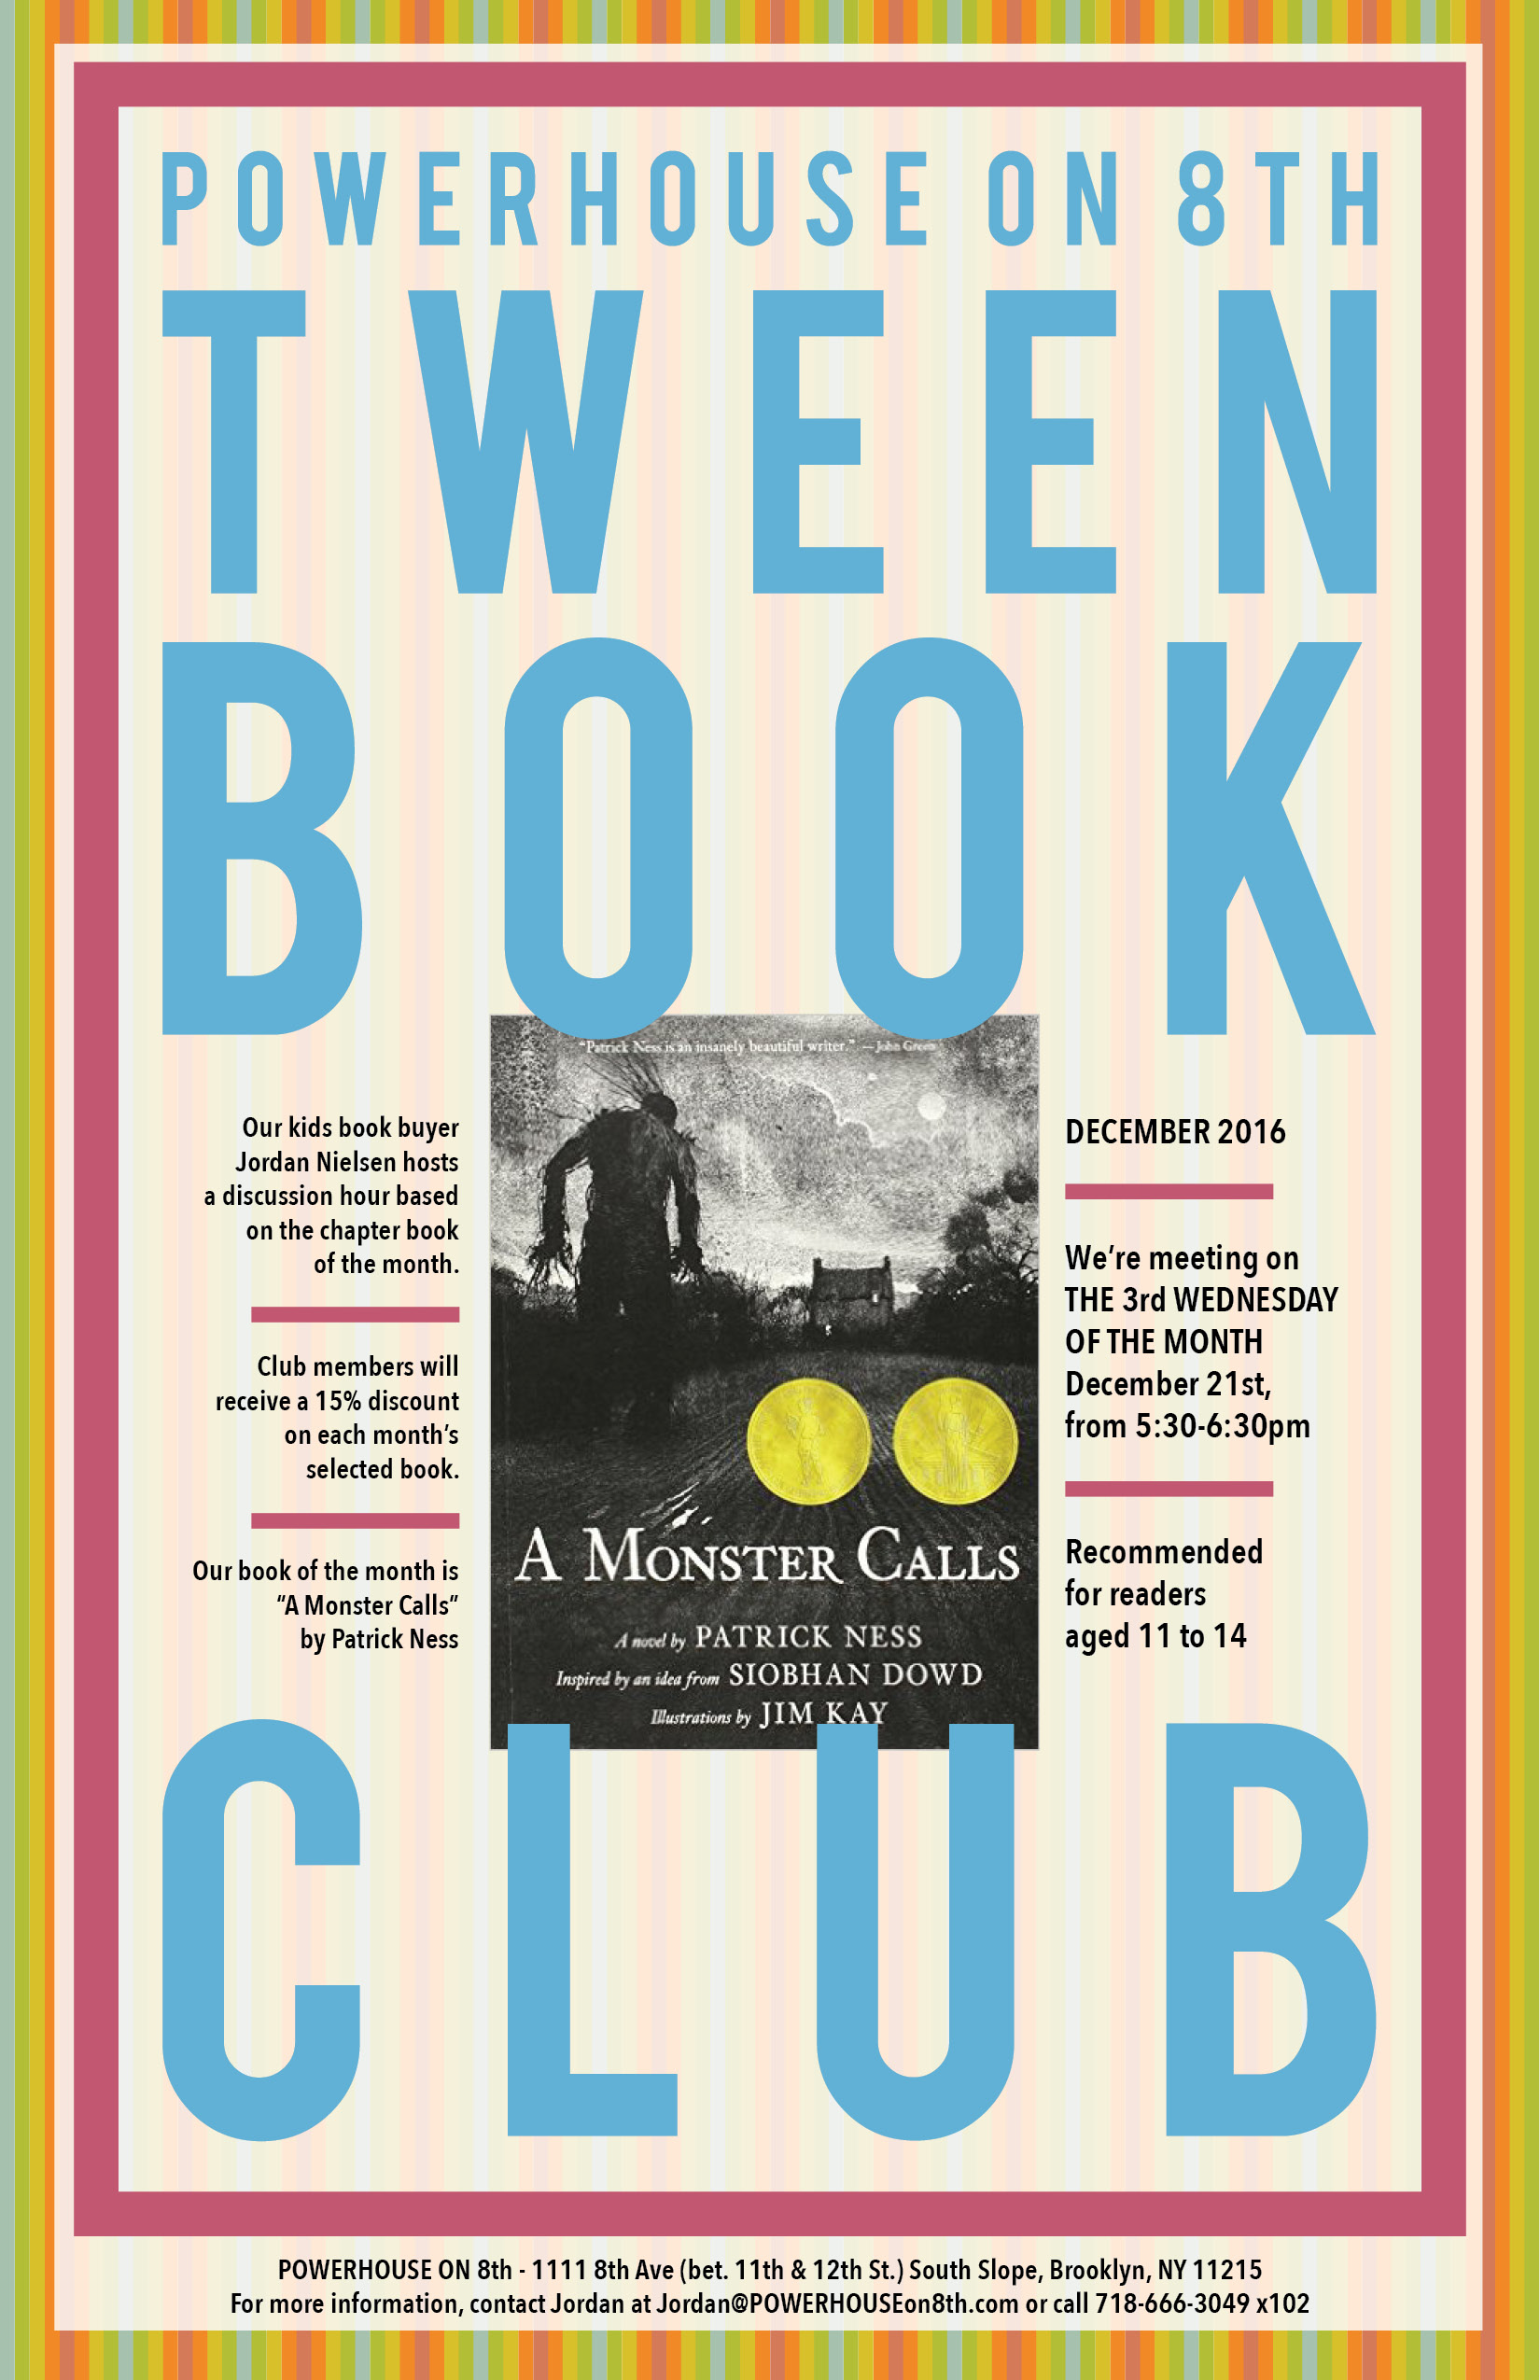 Tween Book Club: A Monster Calls by Patrick Ness